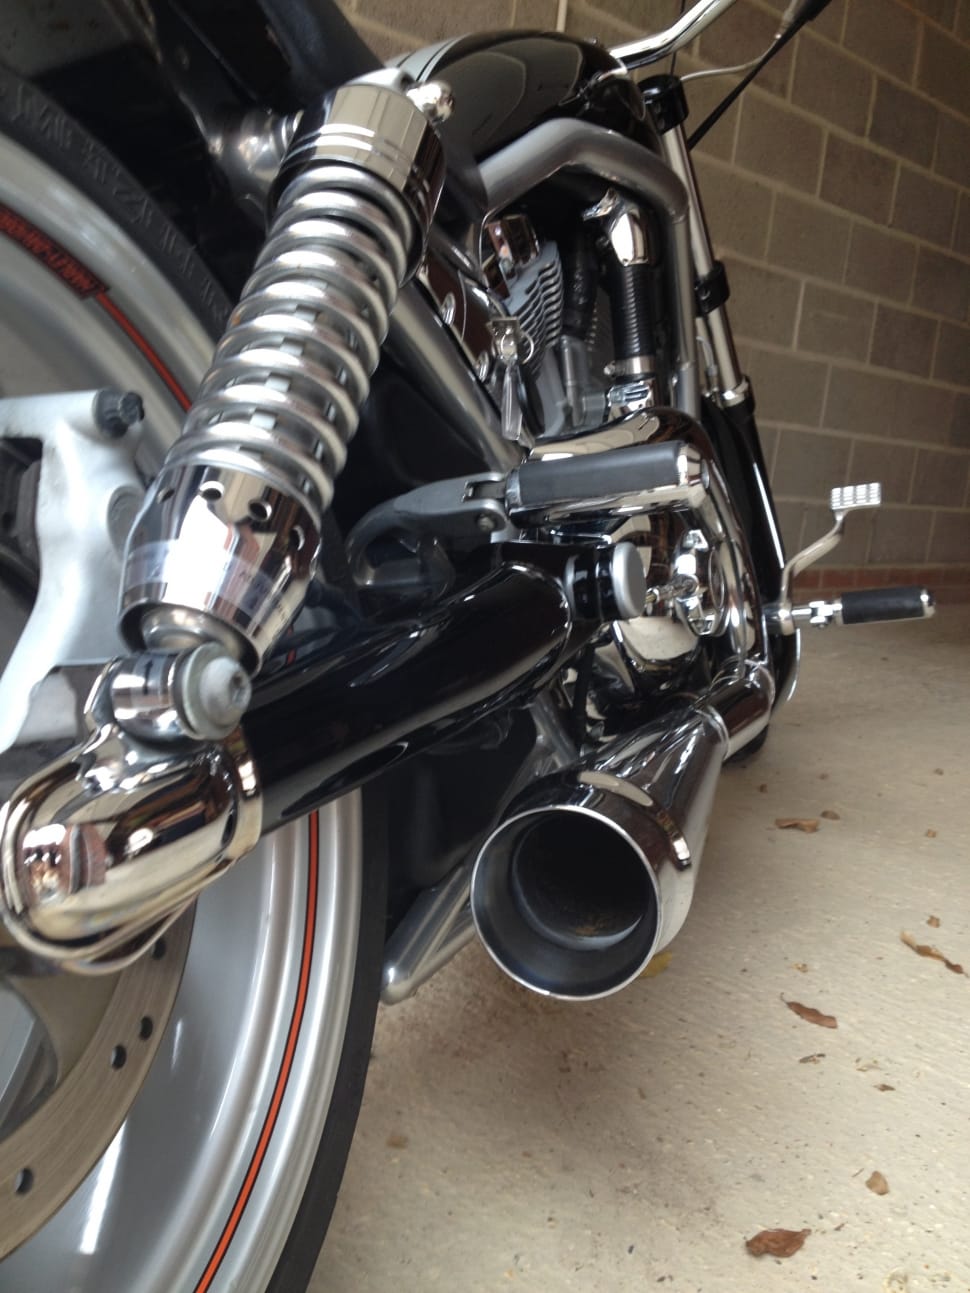 stainless steel and black motorcycle preview